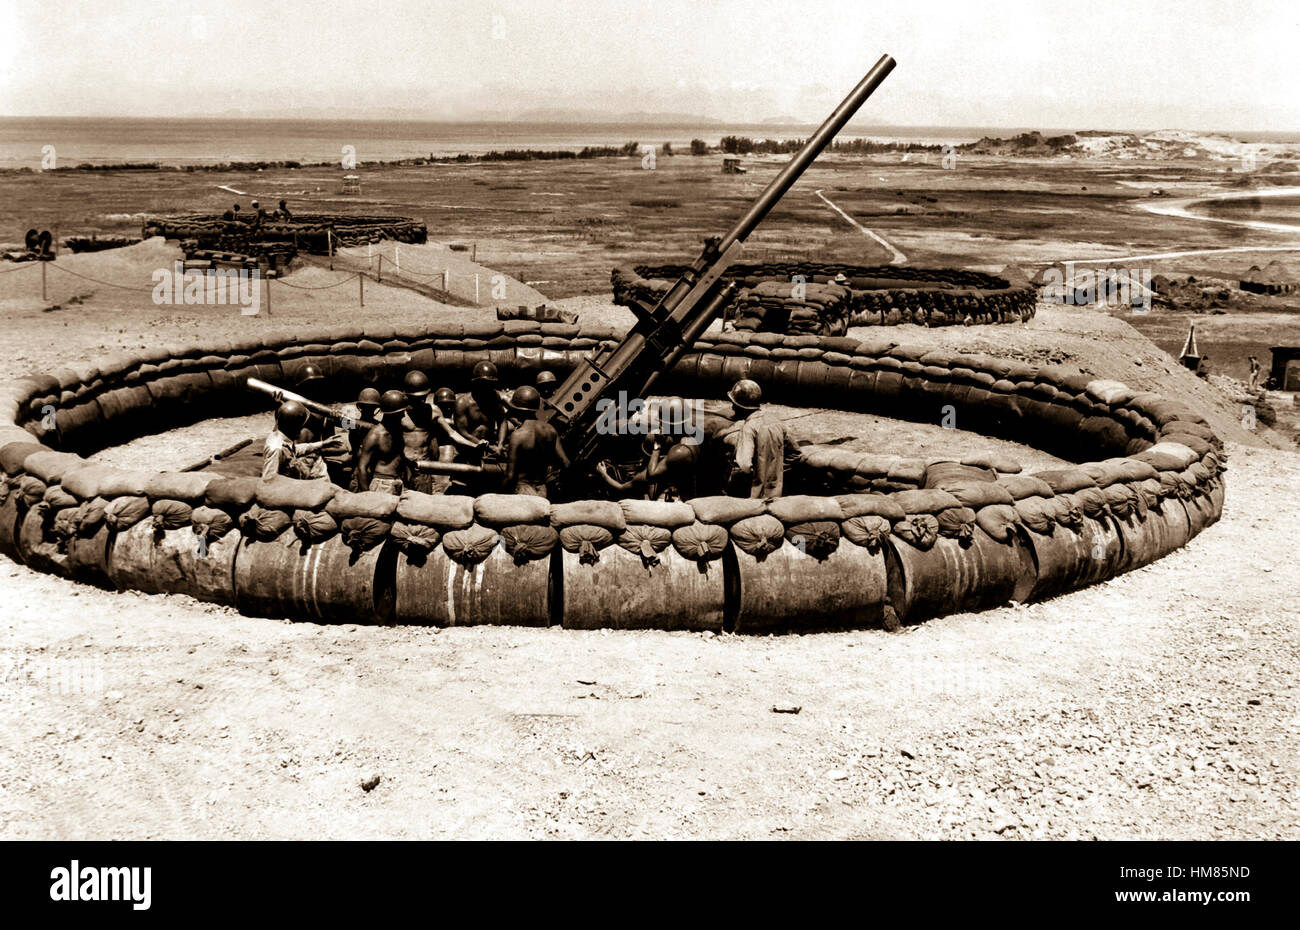 View of #4 90mm AAA gun emplacement with crew in pit.  'D' Battery, 98th AAA Gun Bn., 137th AAA Gp. Okinawa, July 18, 1945.  Hendrickson.  (Army) NARA FILE #:  111-SC-211476 WAR & CONFLICT BOOK #:  1225 Stock Photo